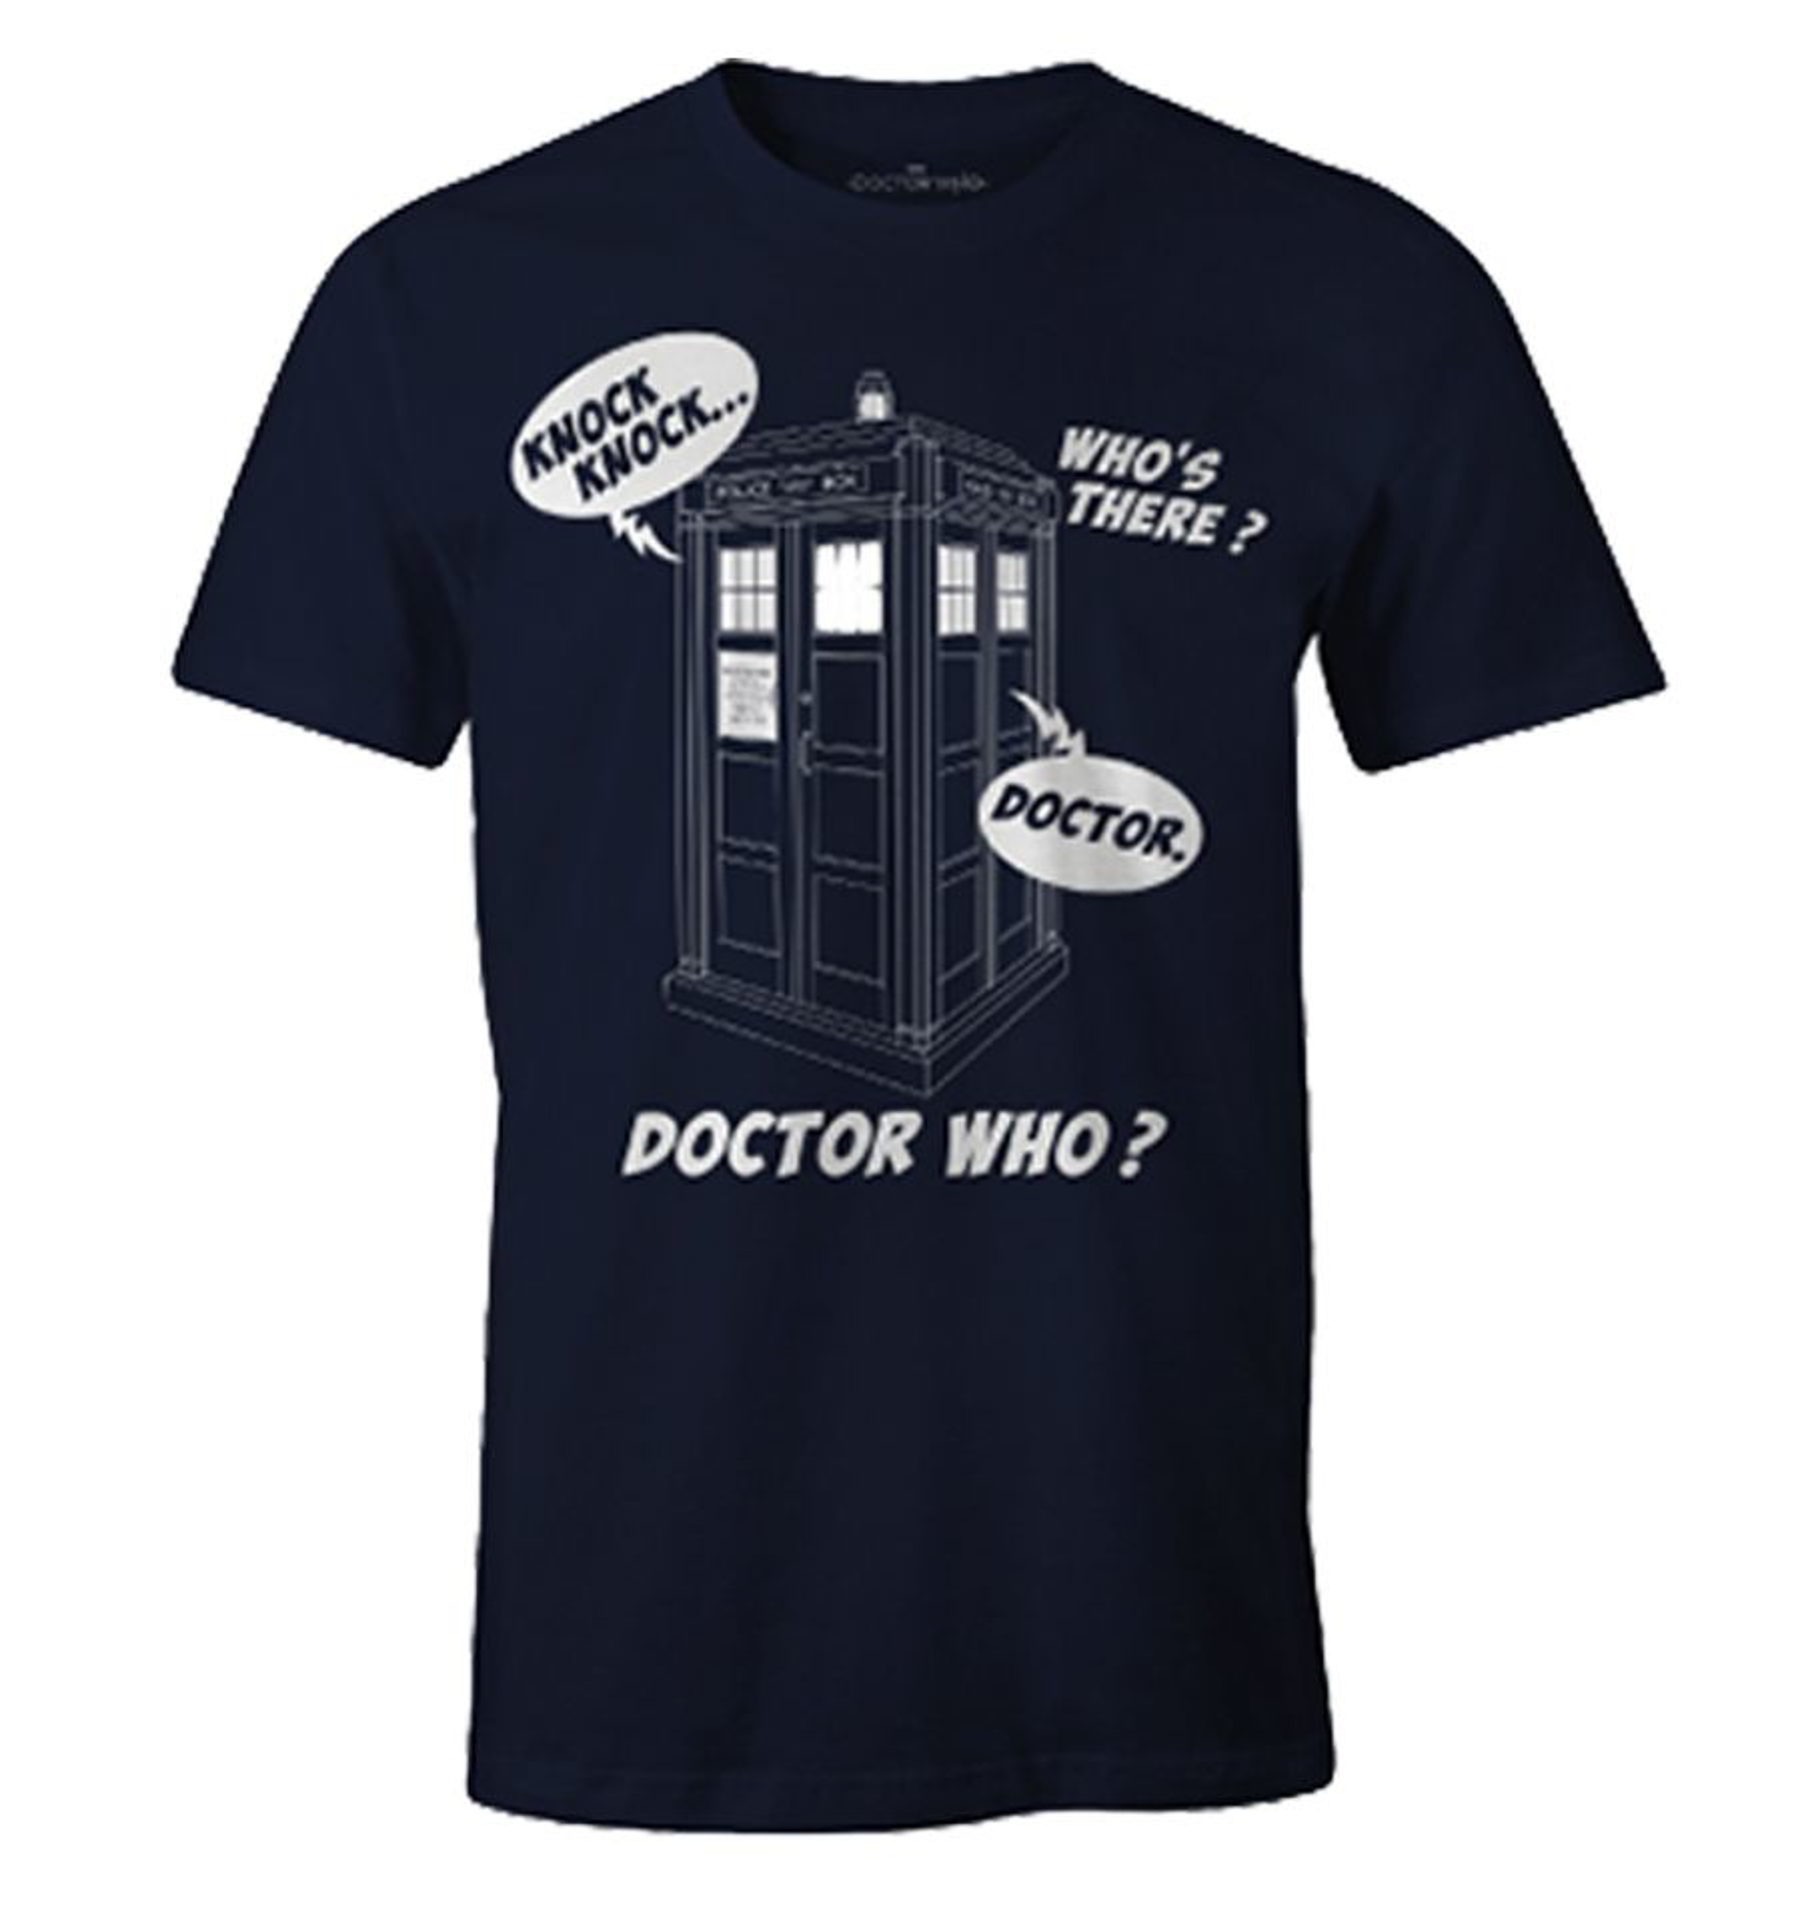 Doctor Who? Navy Blue T-Shirt L